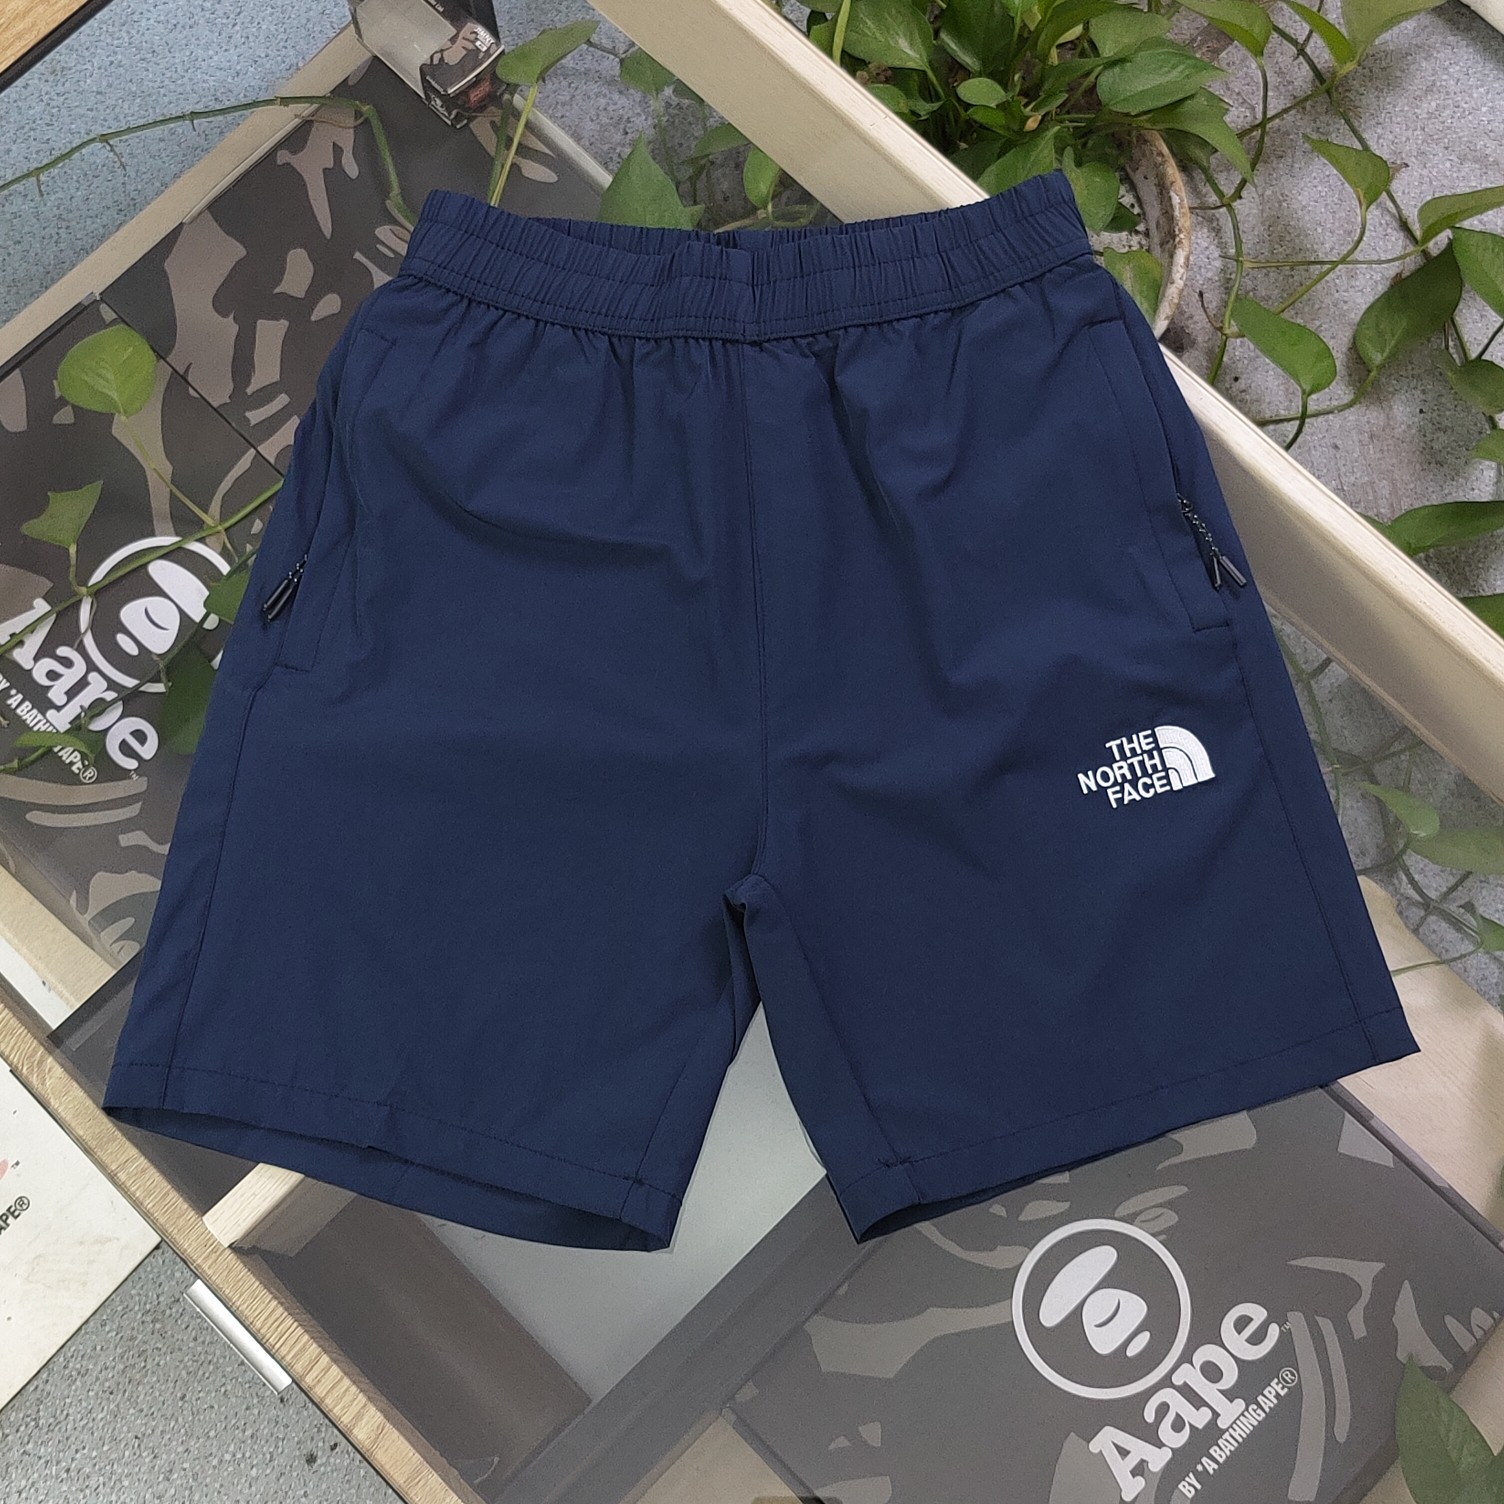 The North Face Clothing Shorts Blue Dark Embroidery Unisex Casual